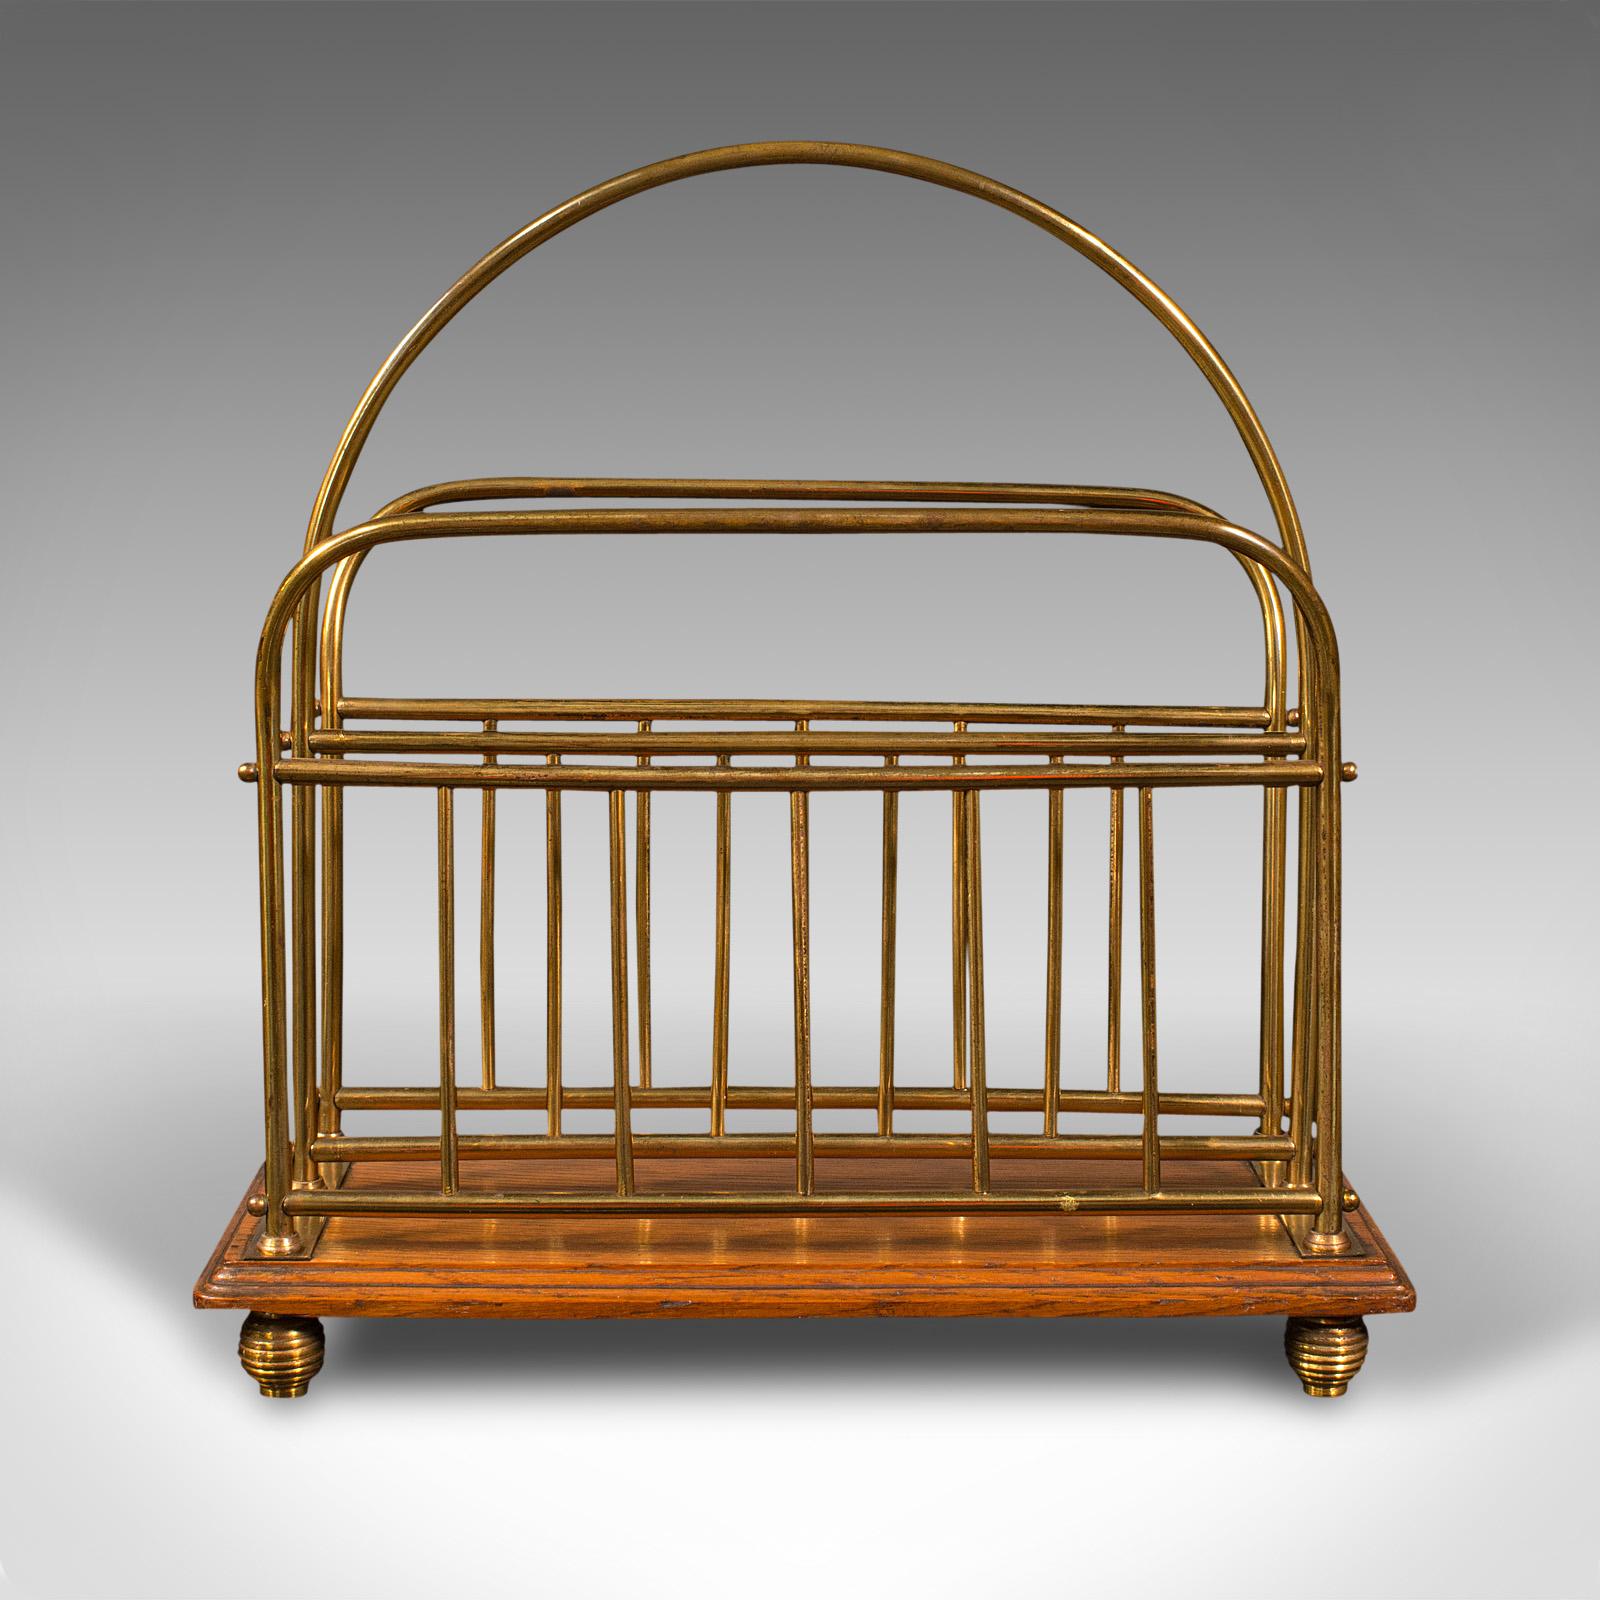 This is an antique table-top newspaper rack. An English, oak and brass magazine or letter Stand, dating to the Victorian period, circa 1880.

Attractive Stand, ideal for the morning paper or periodical
Displays a desirable aged patina and in good